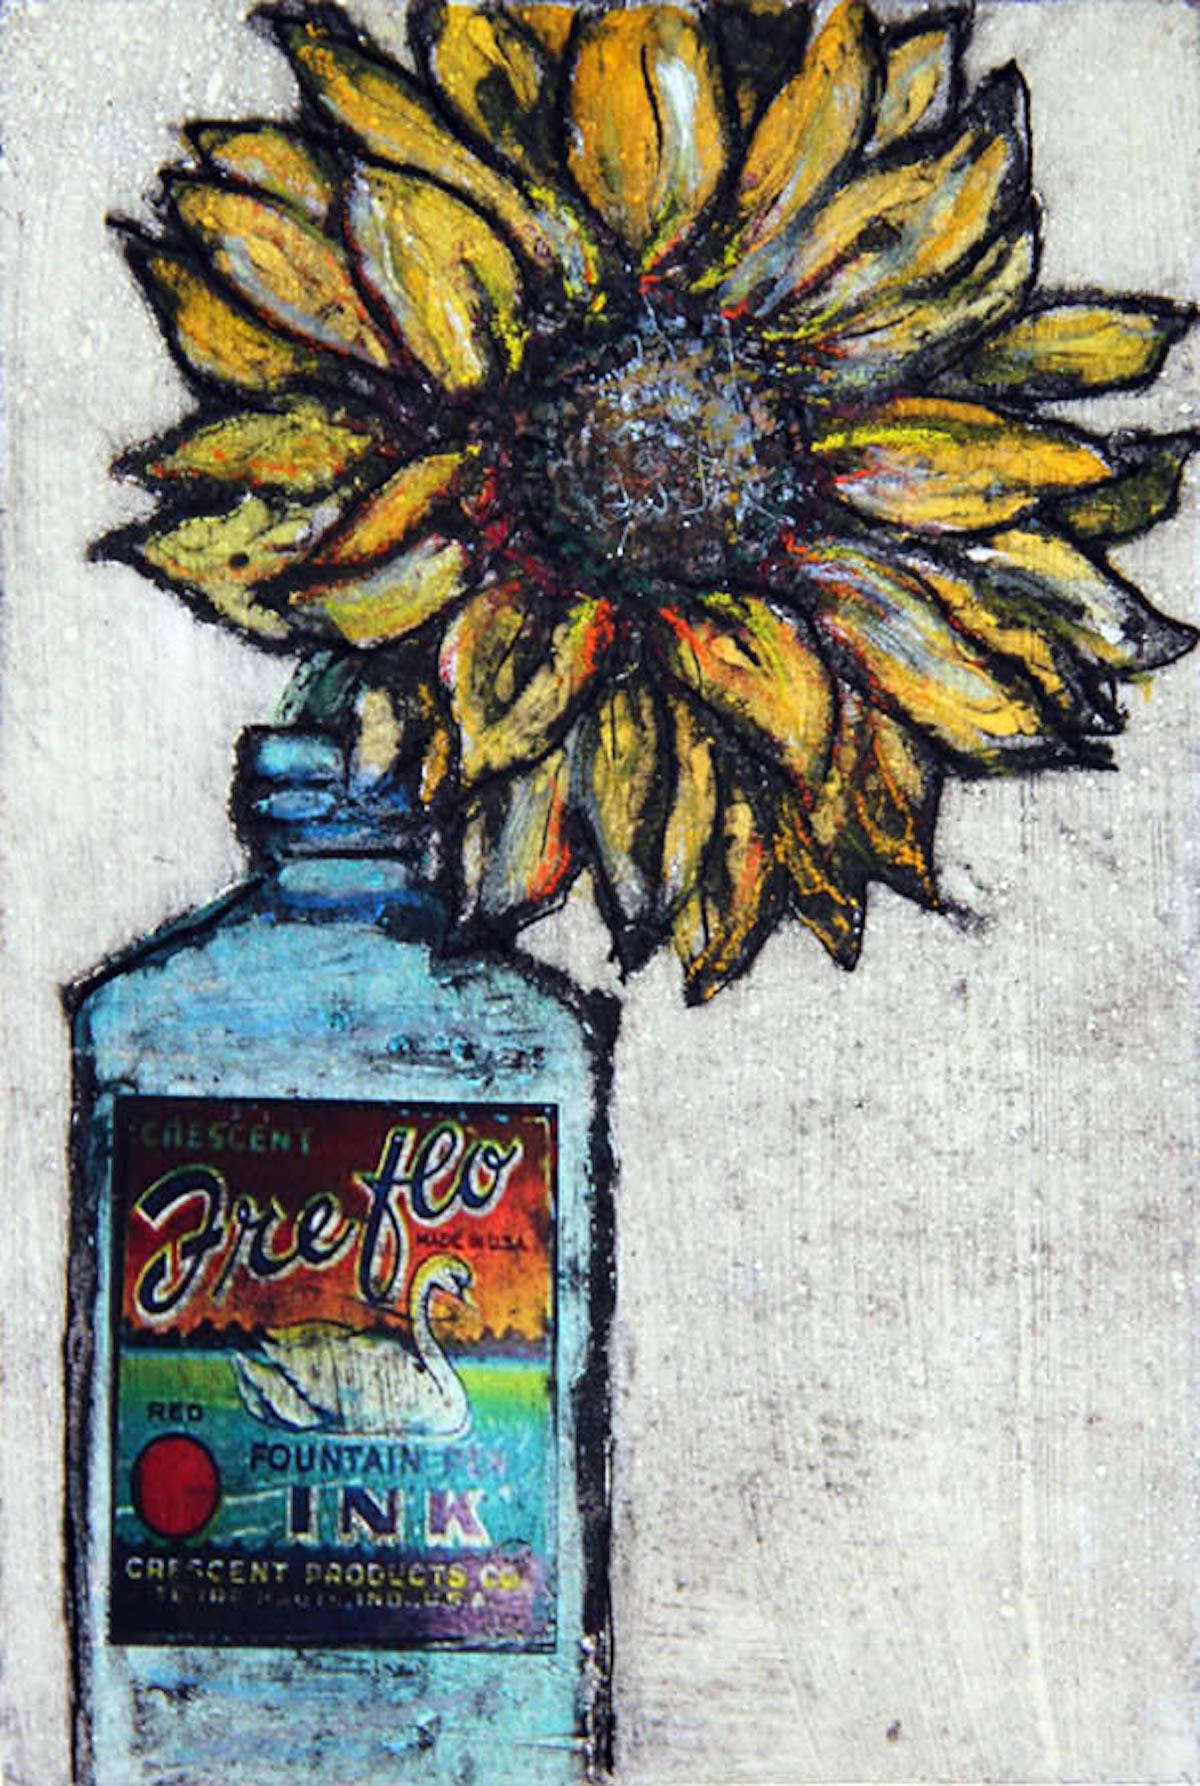 Quiet Beauty and Sunflower in a Bottle by Vicky Oldfield [2022]

Image size of each print: 'Quiet Beauty' H:20cm x W:16cm x D:0.1cm 'Sunflower in a Bottle' H:18cm x W:12cm x D:0.1cm Complete Unframed Size of each print: 'Quiet Beauty' H:20cm x